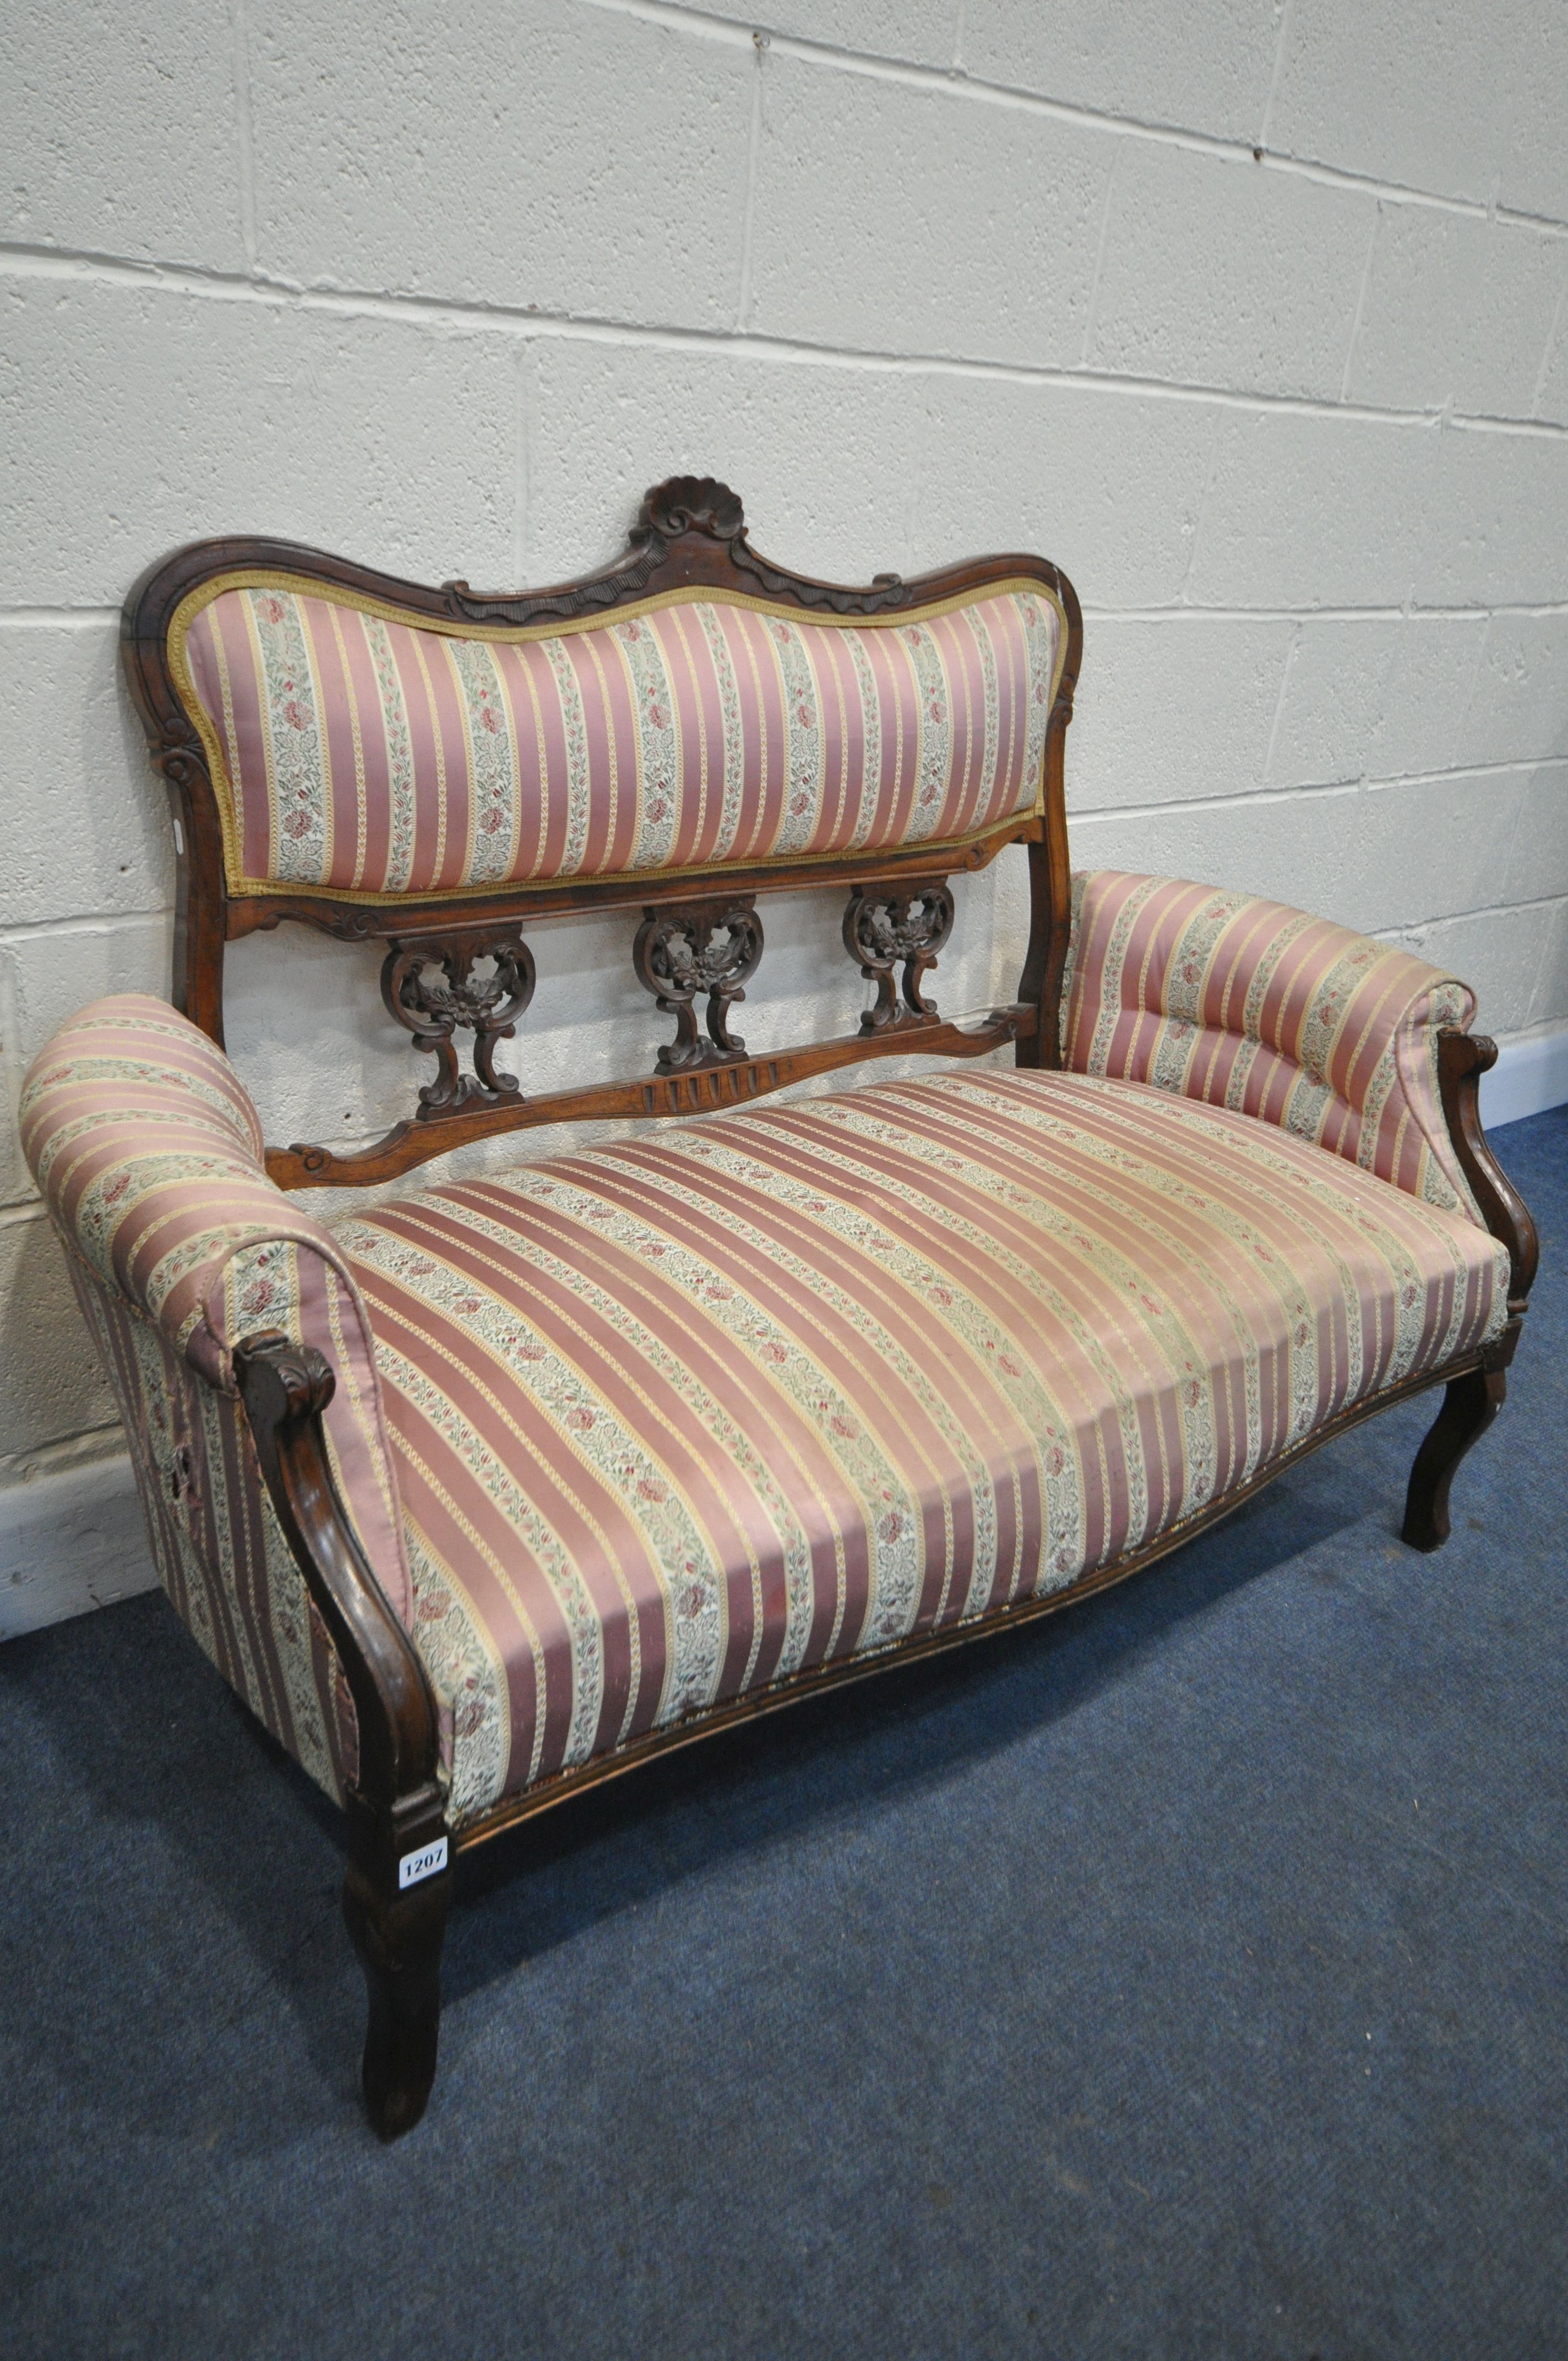 A 19TH CENTURY MAHOGANY SOFA, with carved open fretwork back, on stripped and floral upholstery, - Image 2 of 5